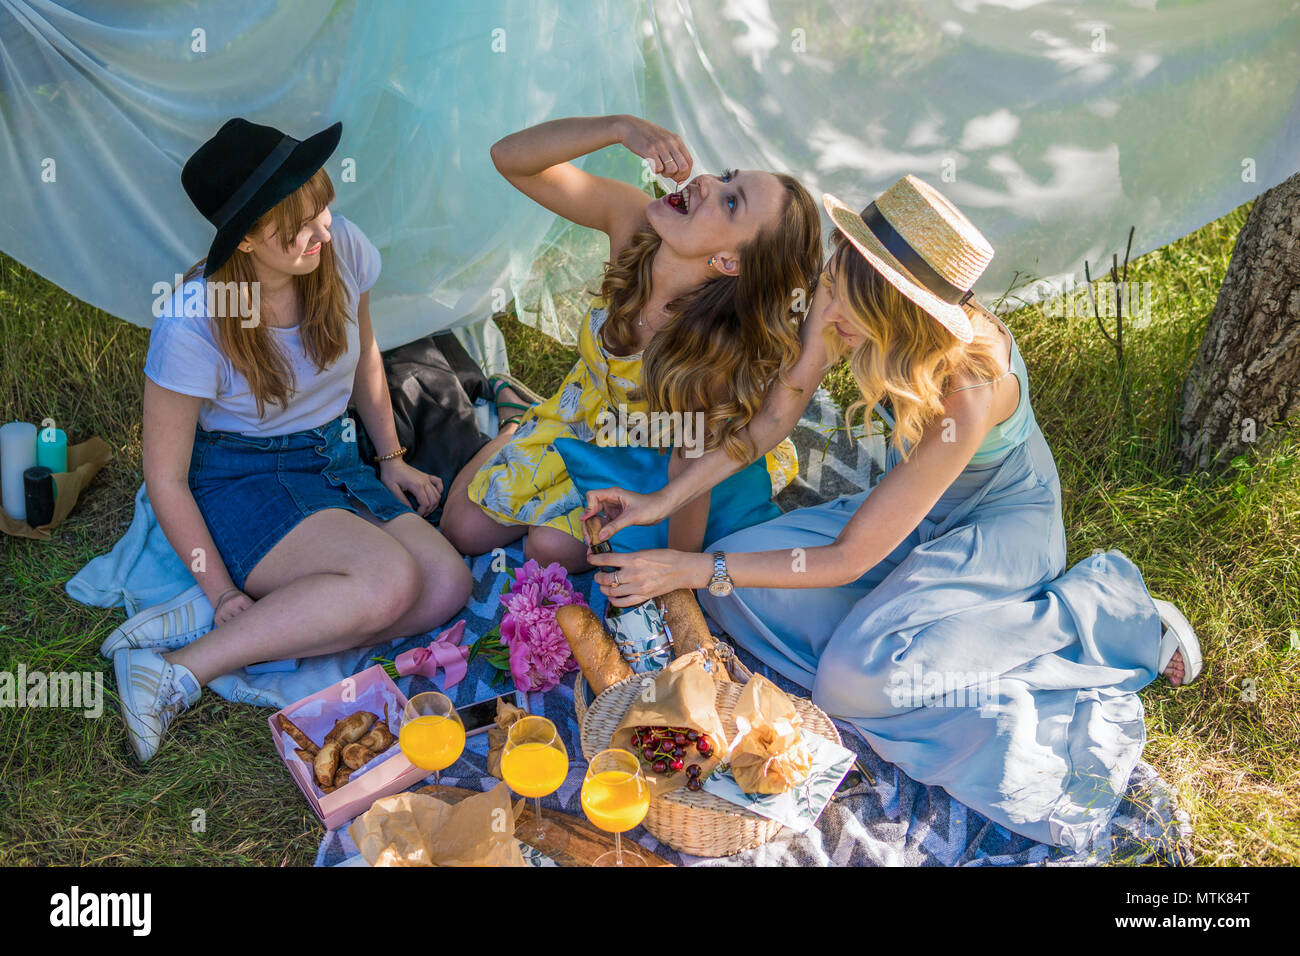 Group of girls friends making picnic outdoor Stock Photo